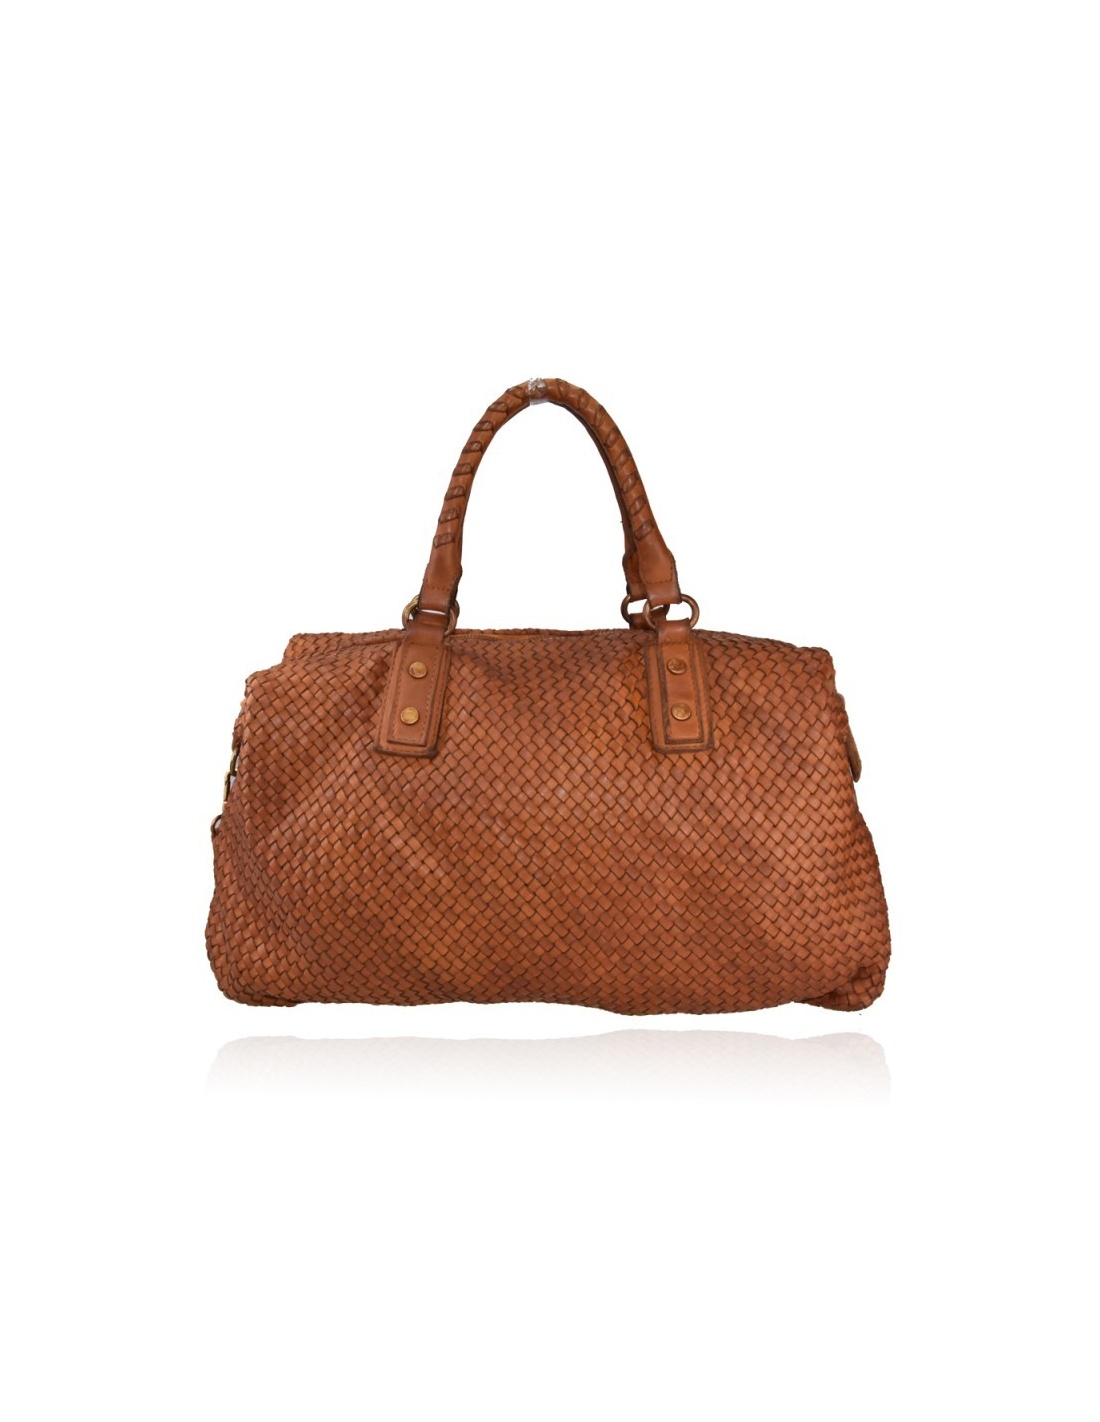 Italian Leather Bags, leather bags from italy